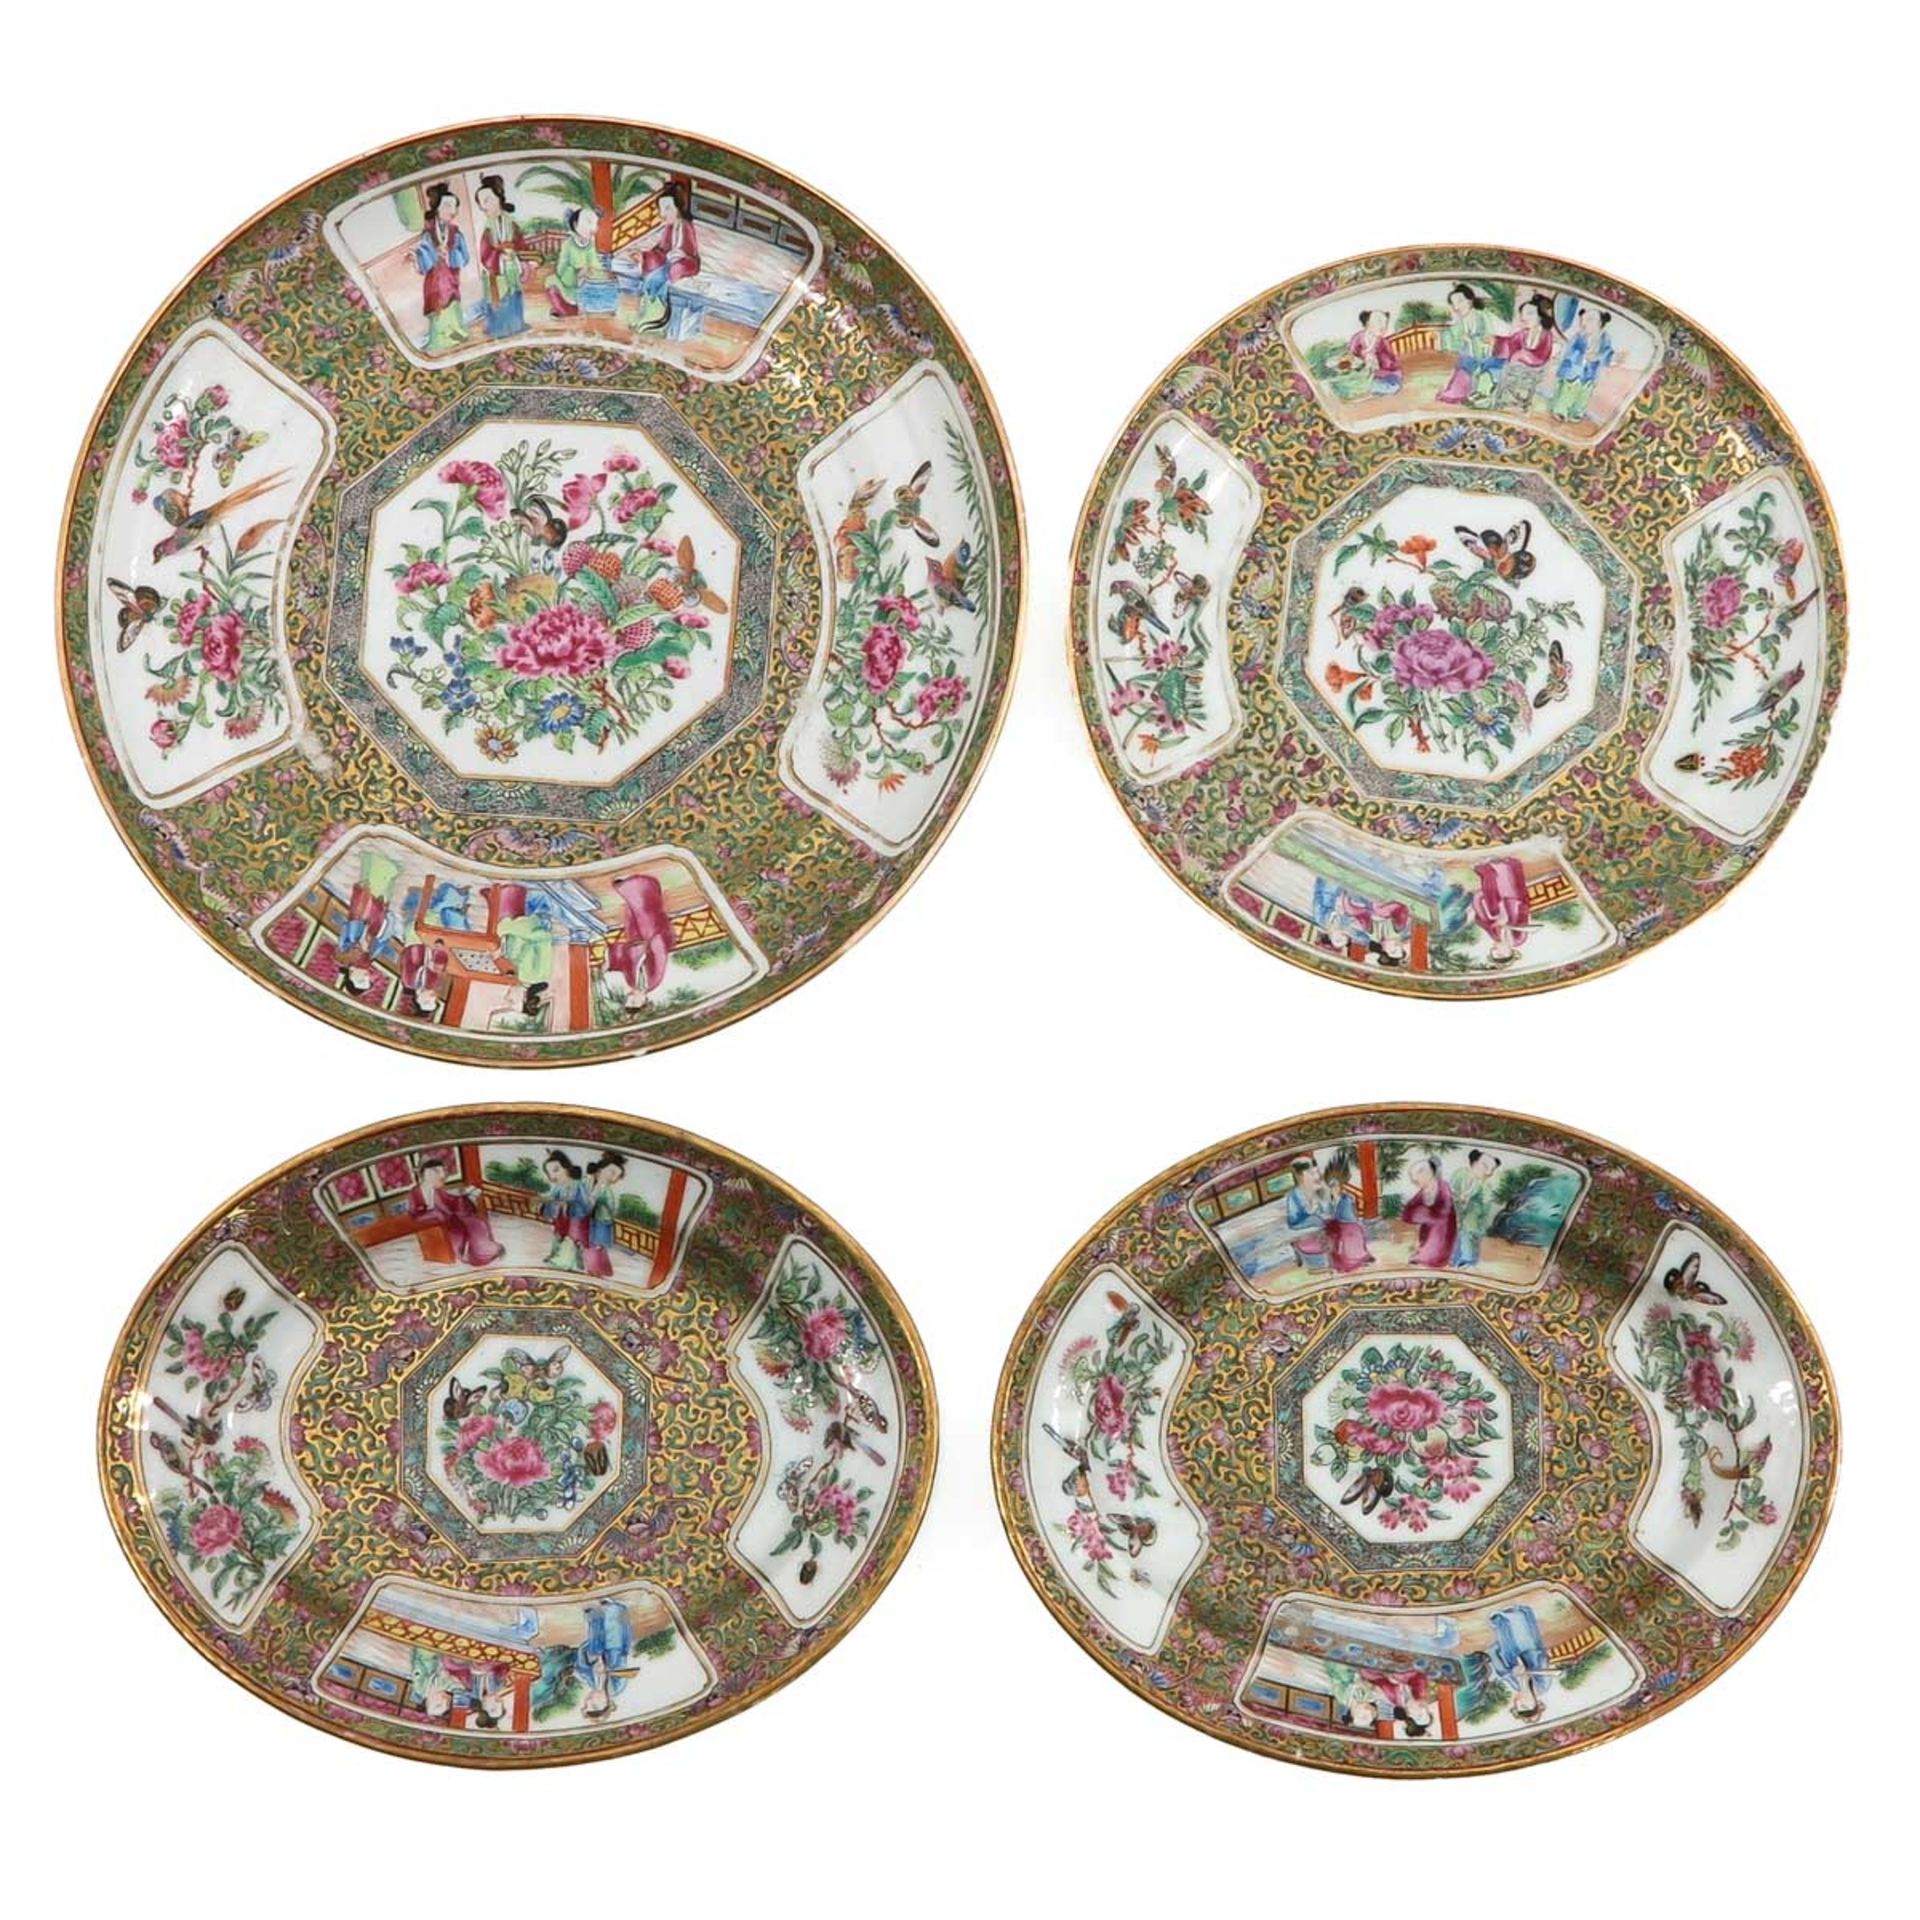 A Collection of 4 Cantonese Plates